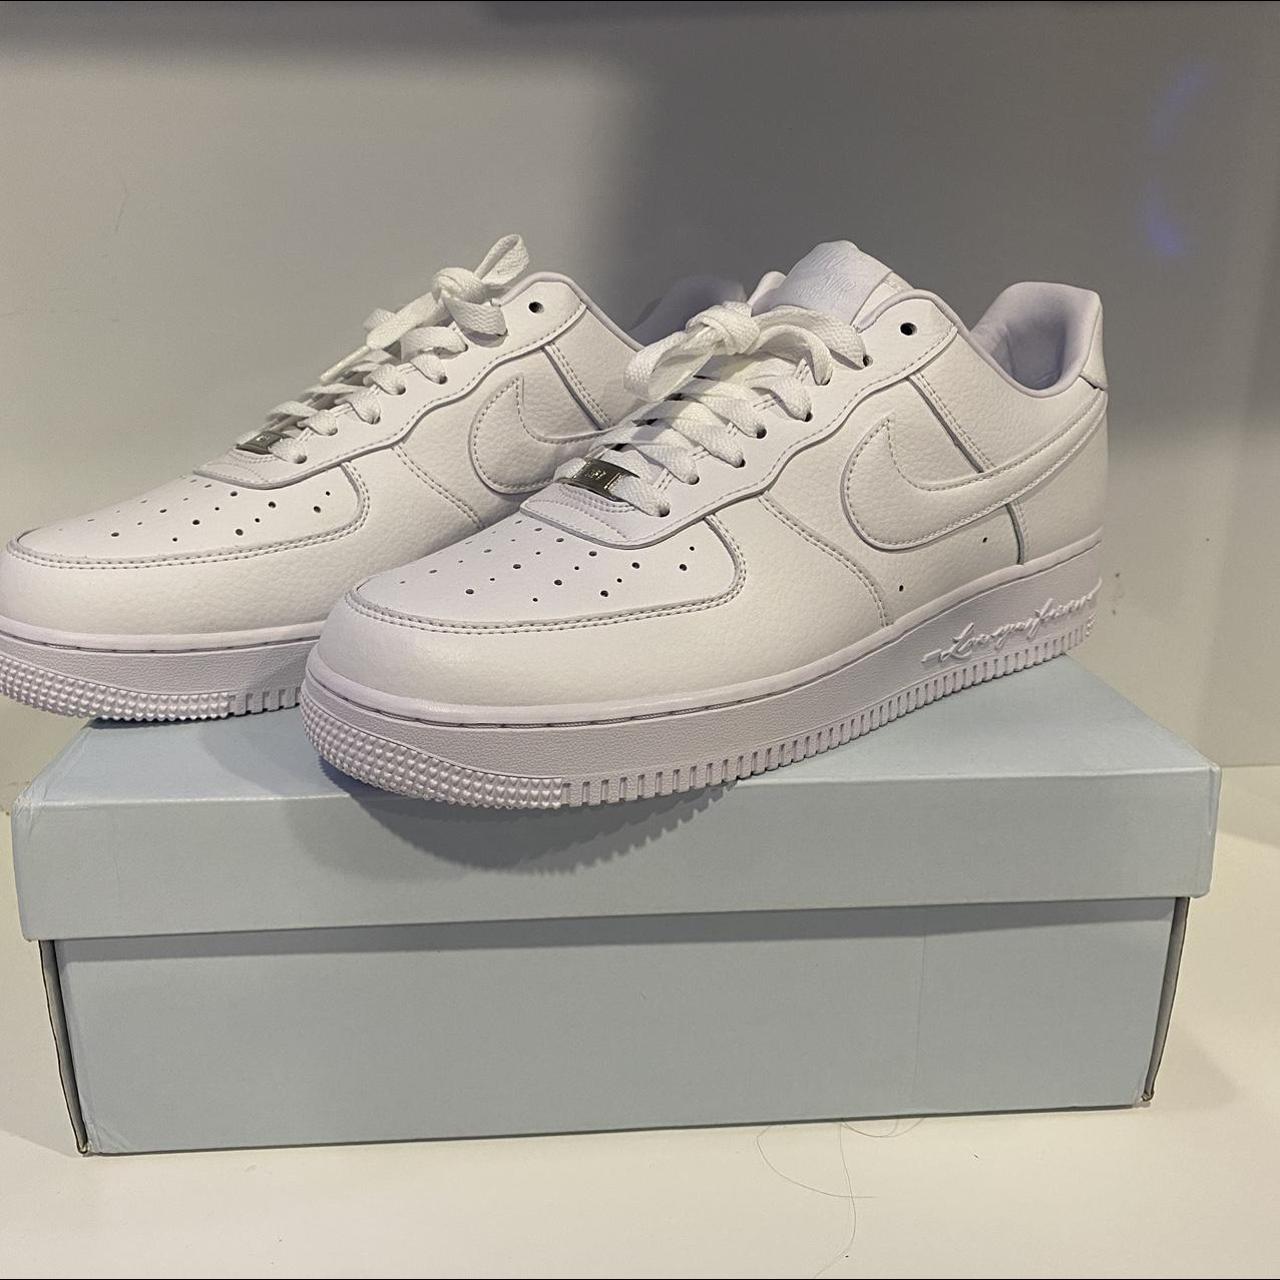 Nike Nocta Air Force 1 Perfect condition Wear once... - Depop